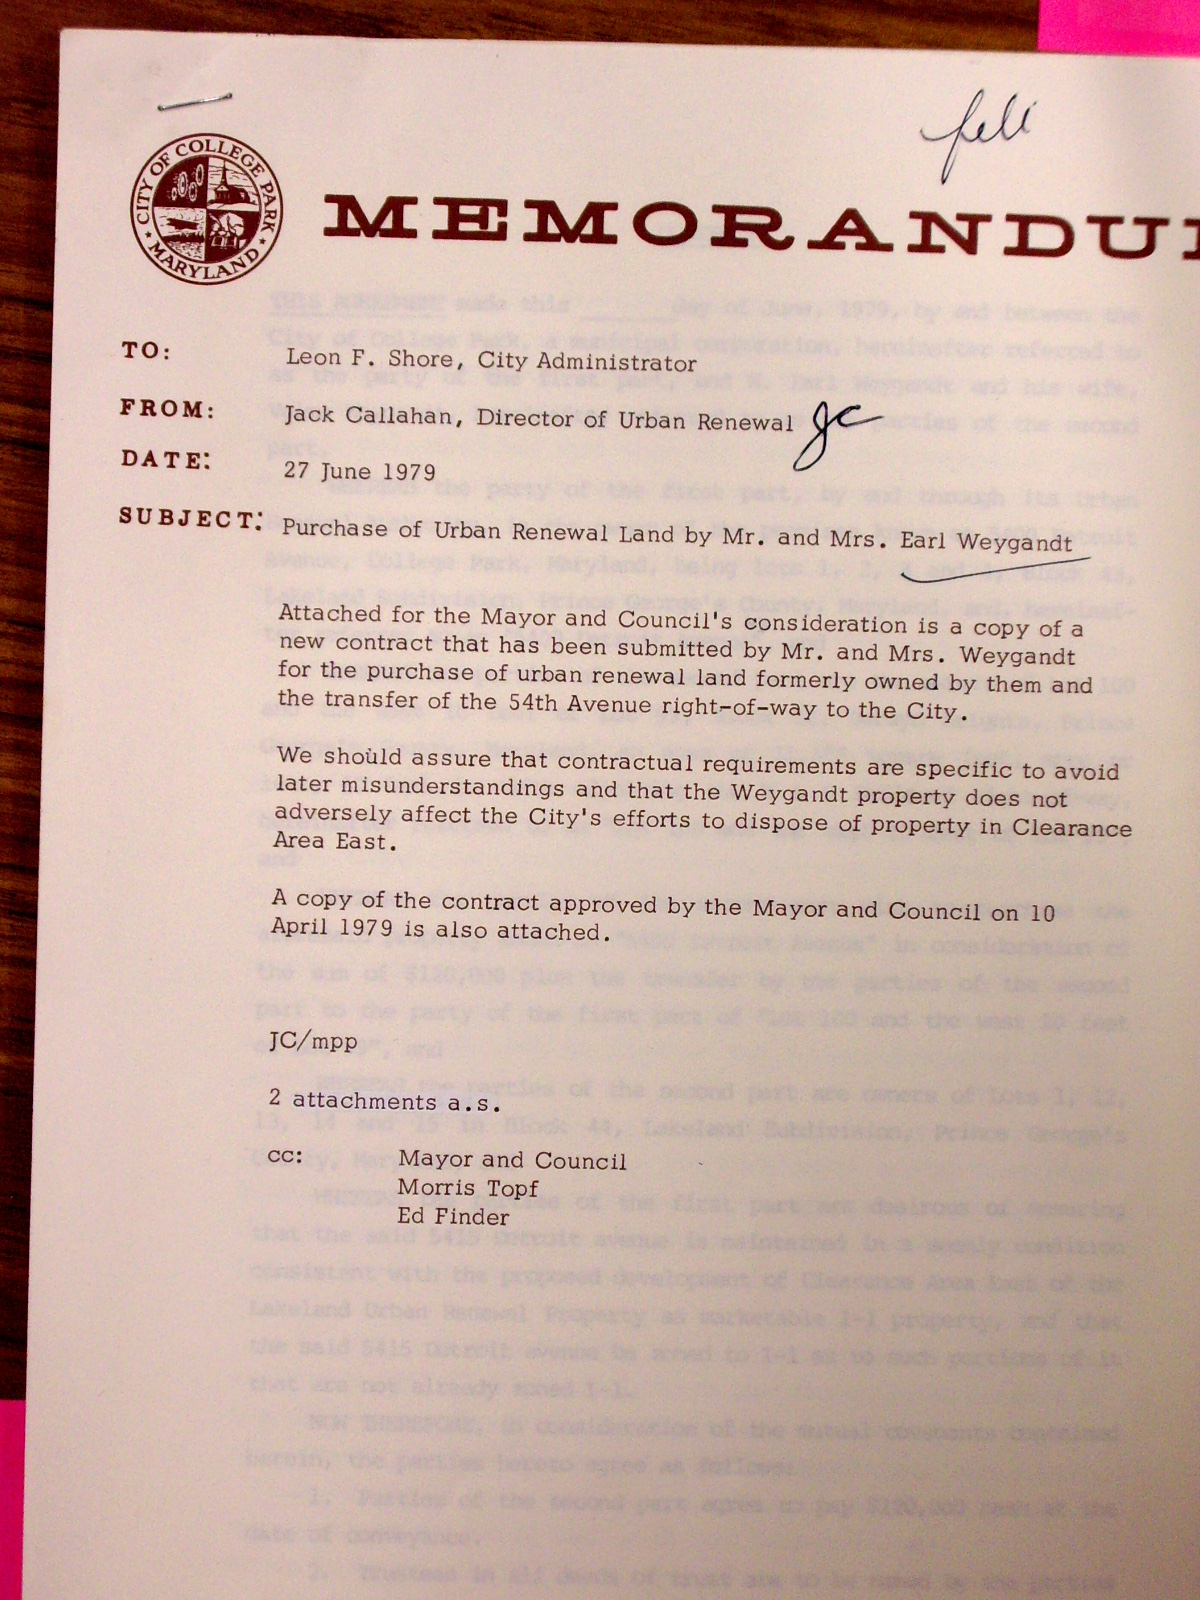 Memorandum to Leon Shore. from Jack Callahan with attachments